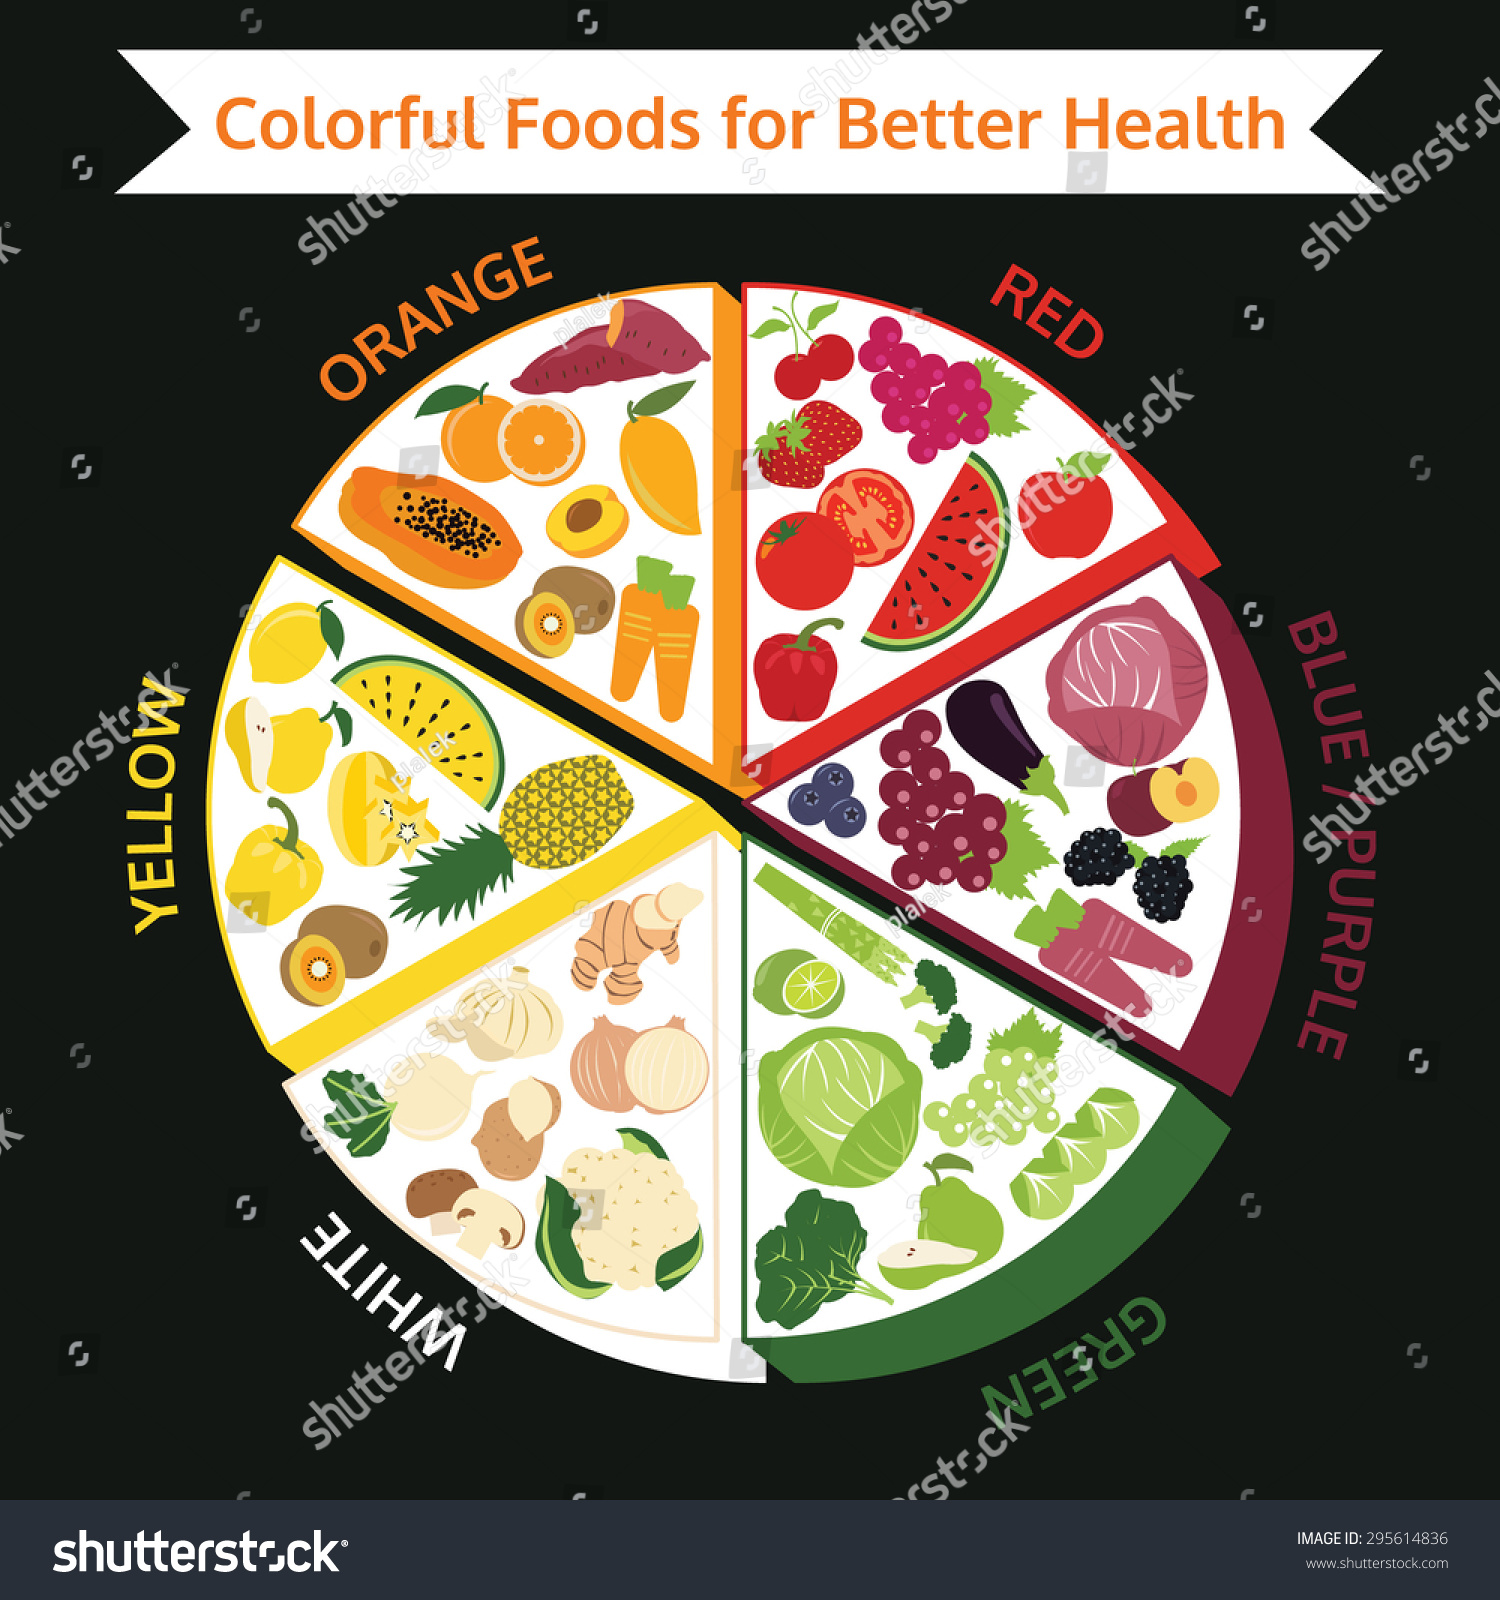 Colorful Food For Better Health, Vegetable And Fruit With Orange ...